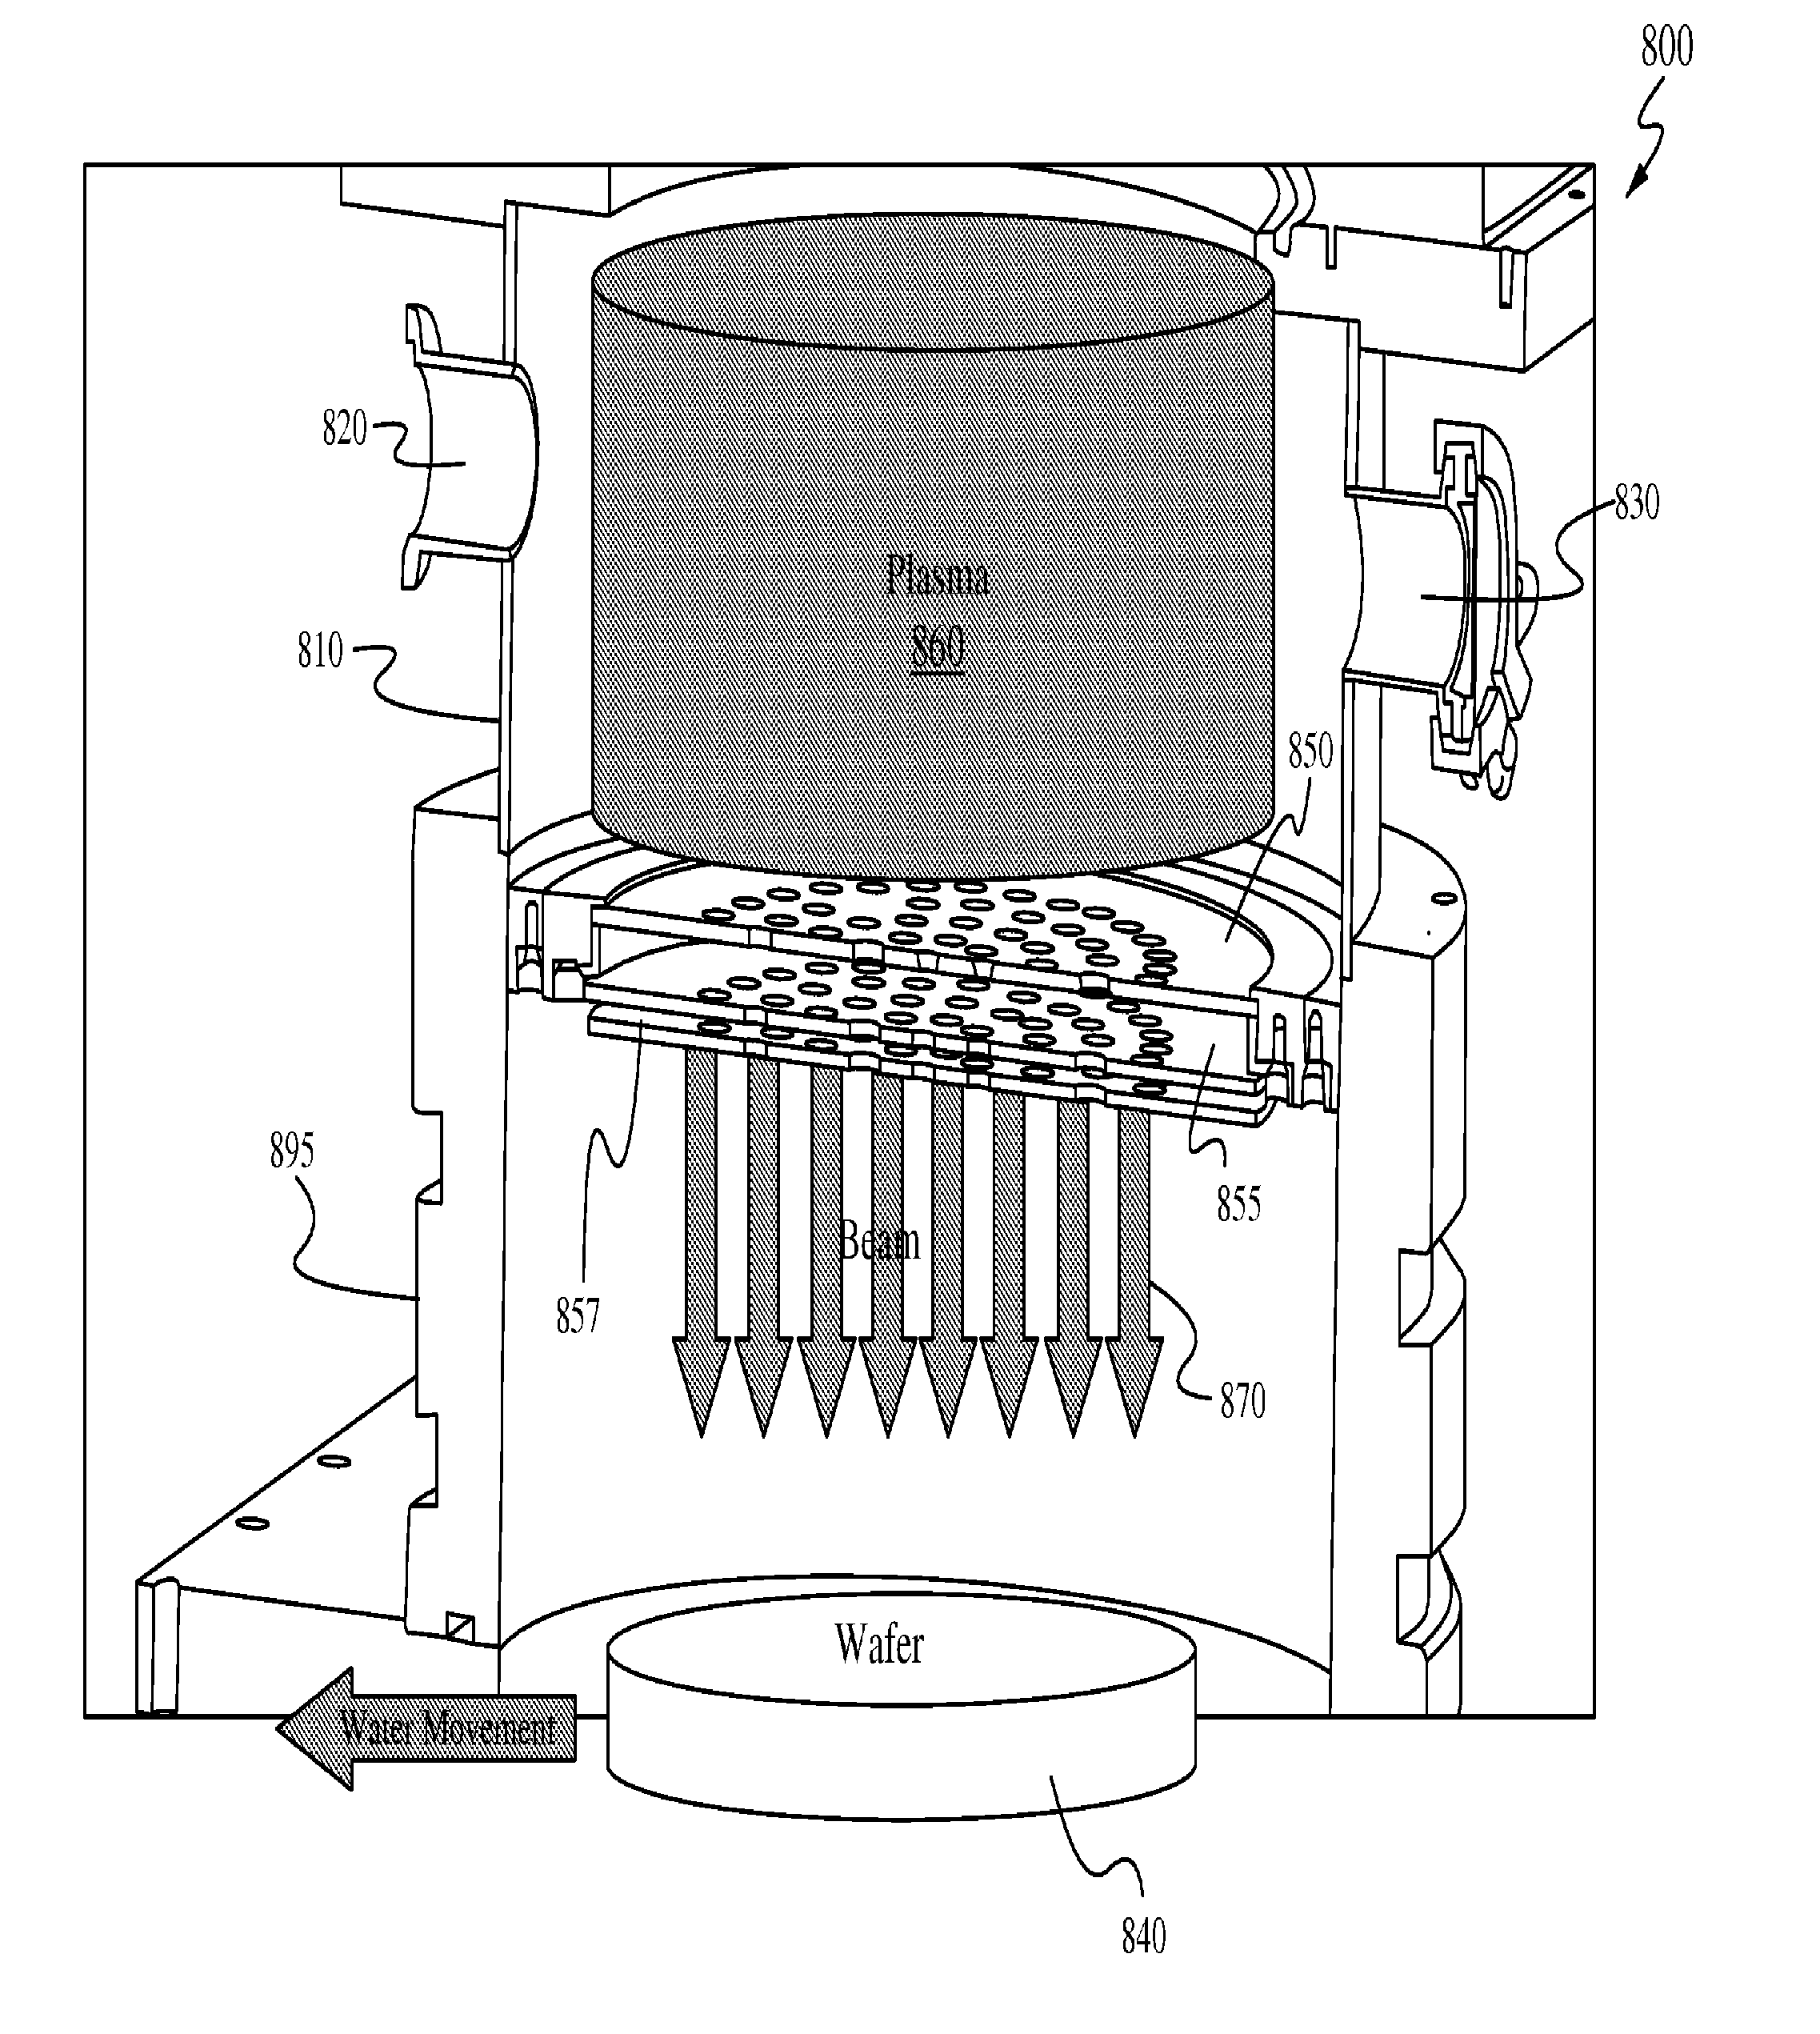 Method for ion implant using grid assembly